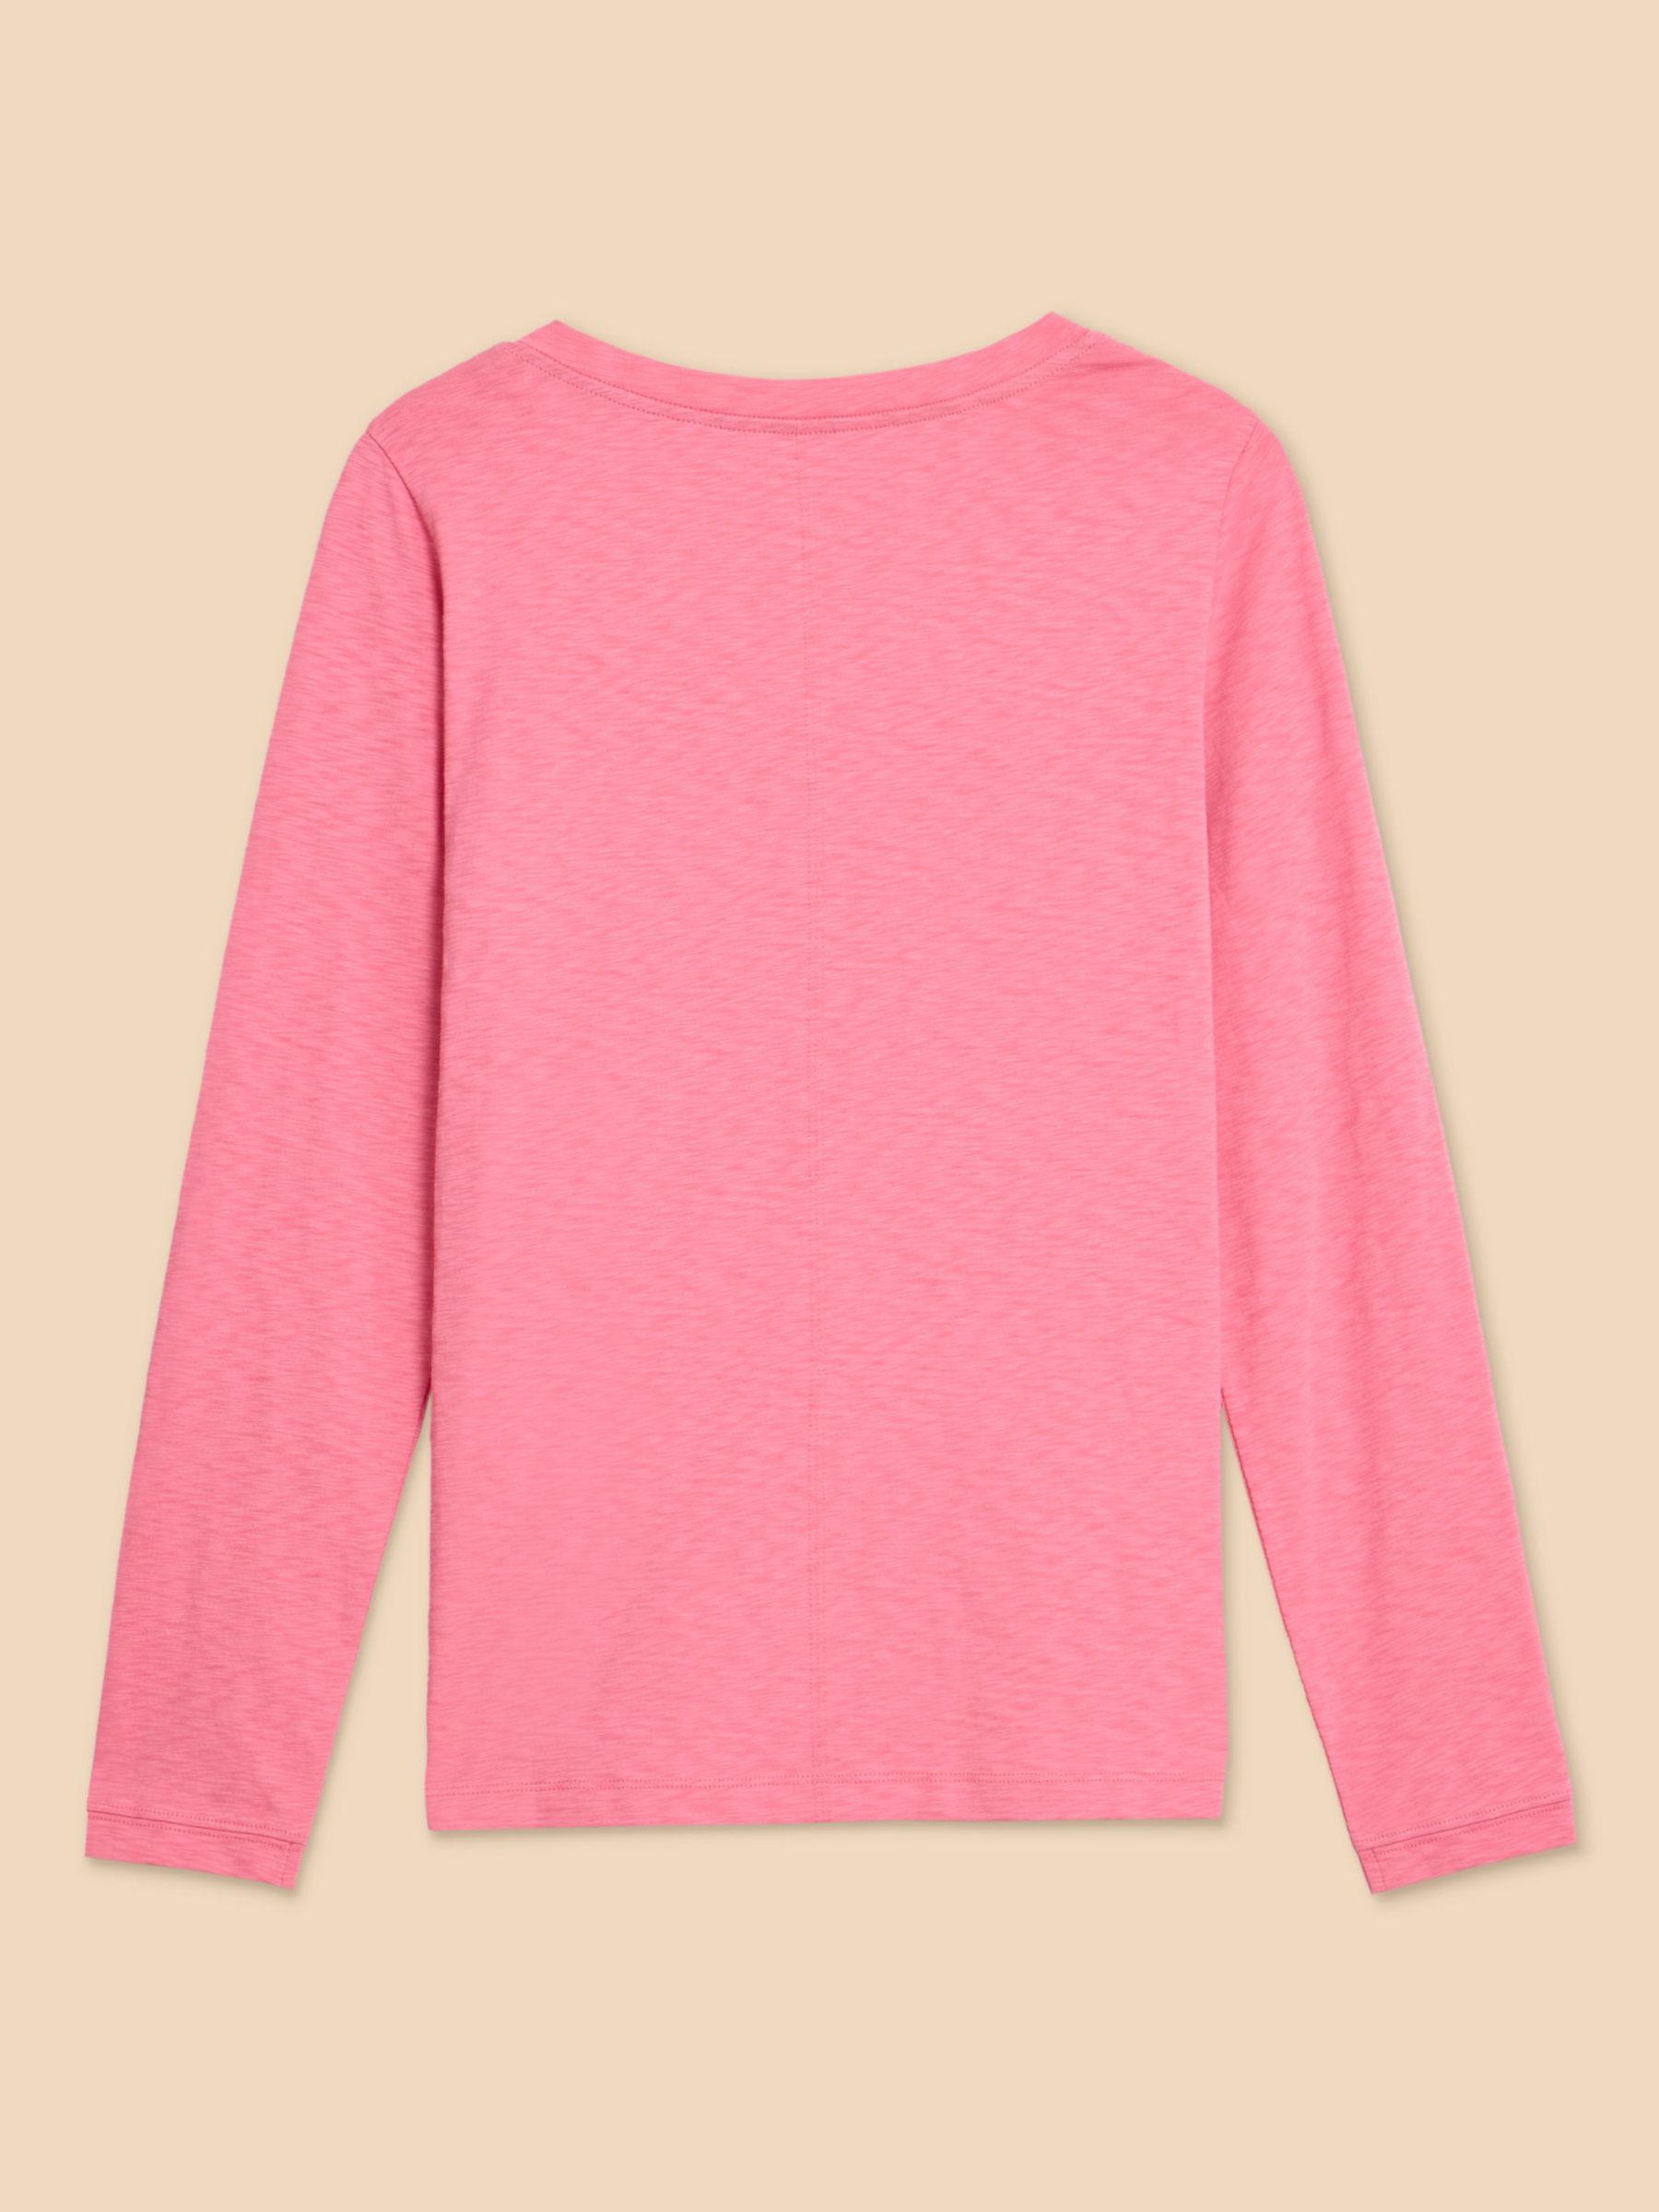 White Stuff Nelly Cotton Long Sleeve Top, Mid Pink at John Lewis & Partners